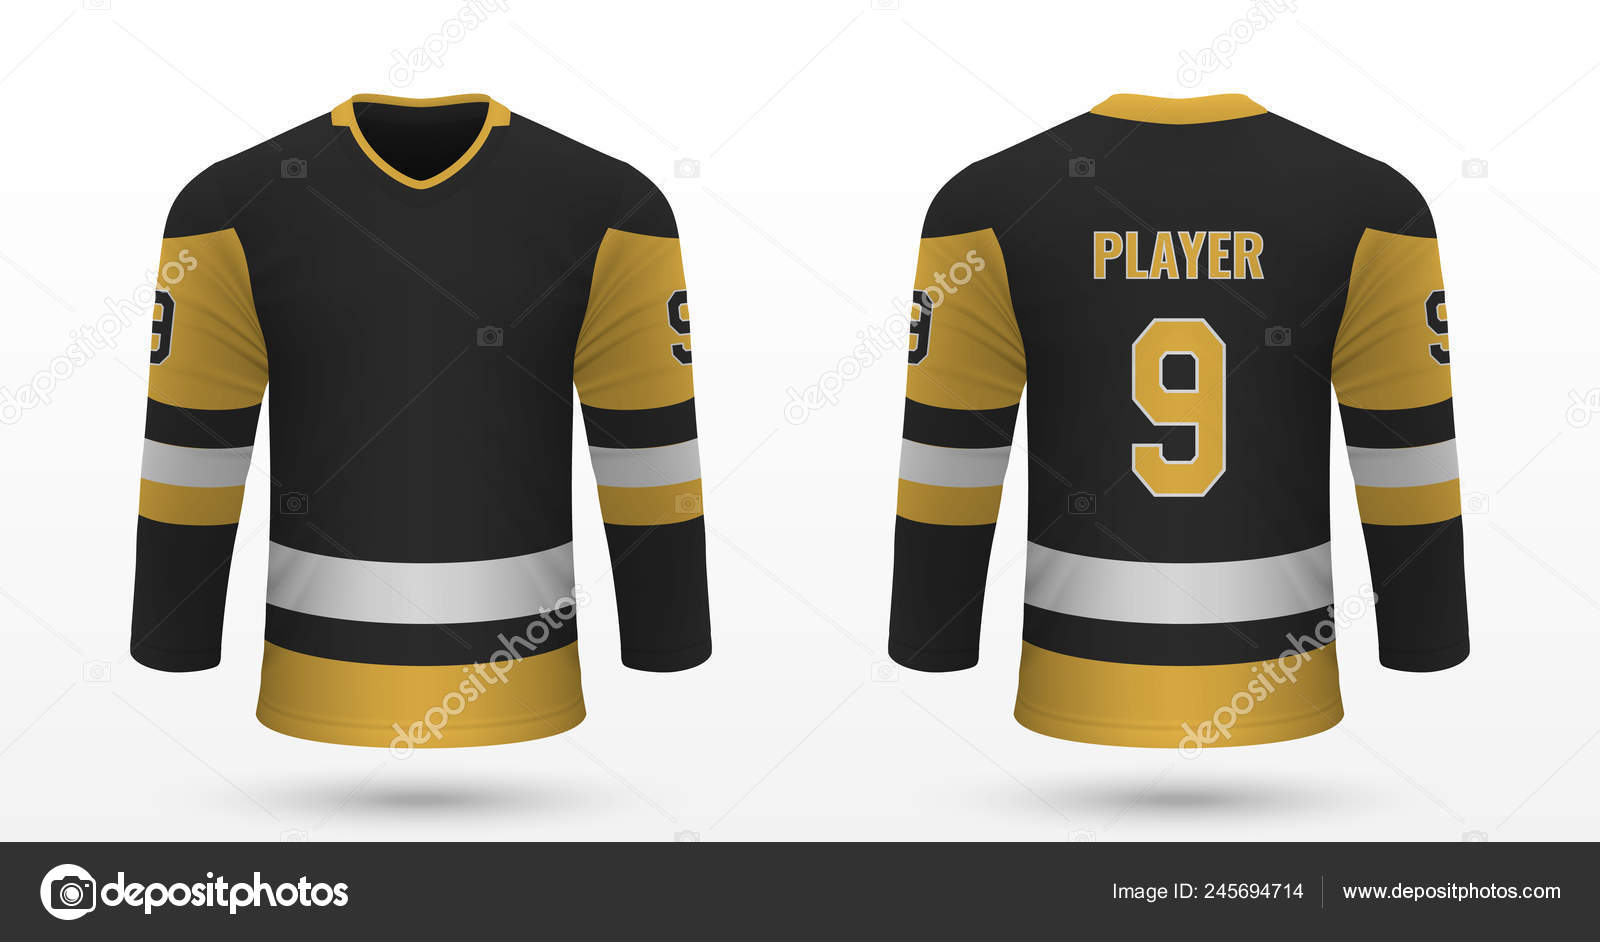 Realistic sport shirt Pittsburgh Penguins, jersey template for ice